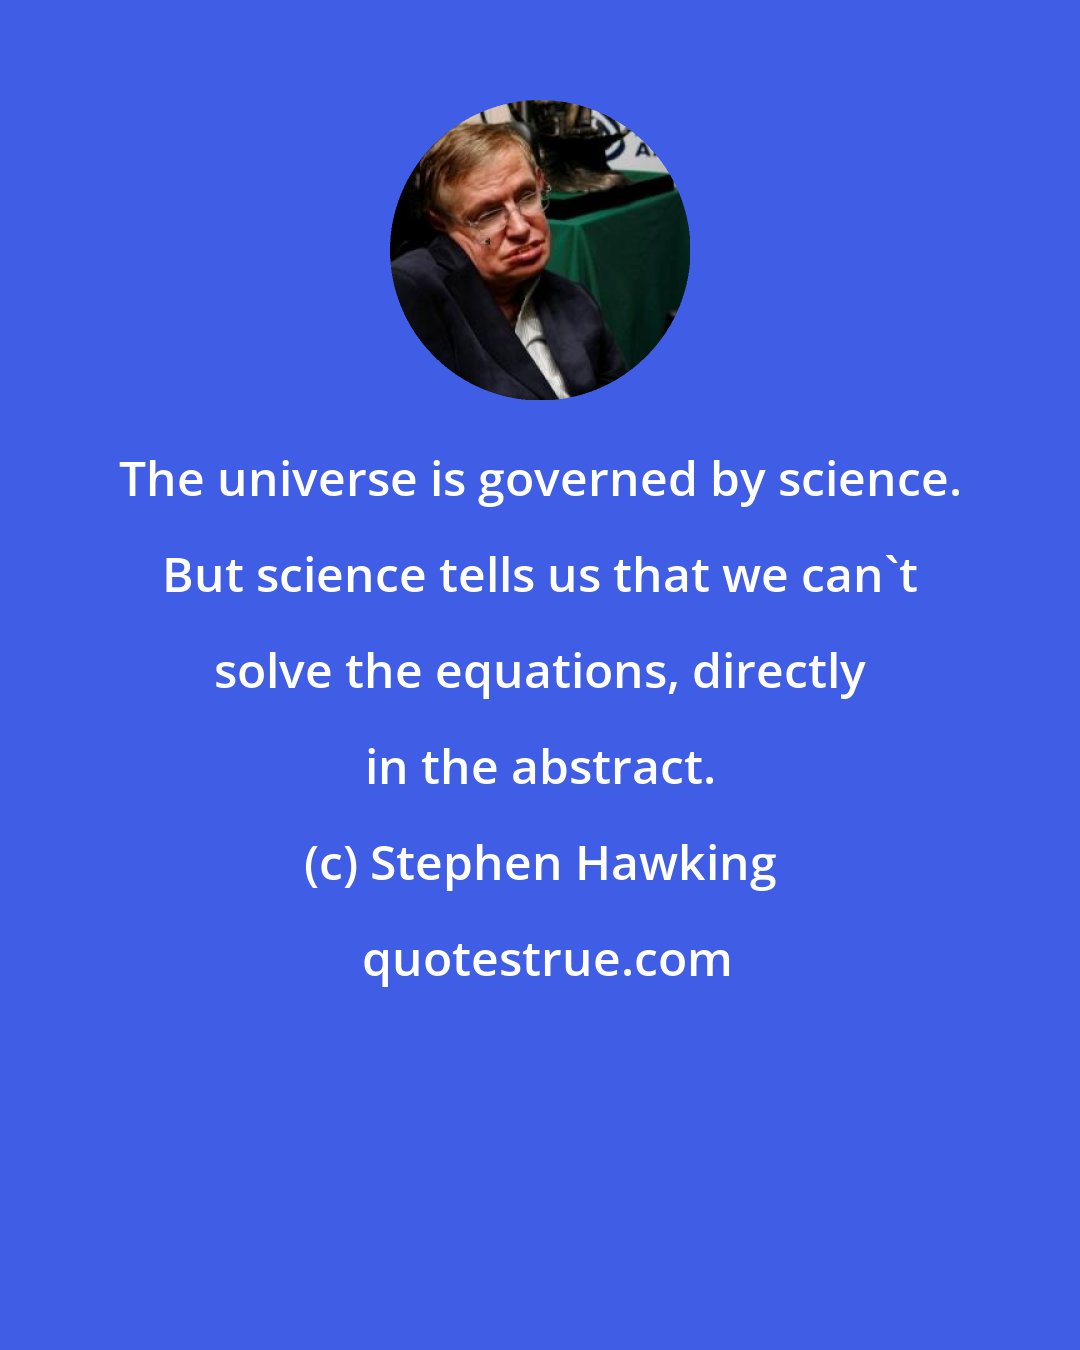 Stephen Hawking: The universe is governed by science. But science tells us that we can't solve the equations, directly in the abstract.